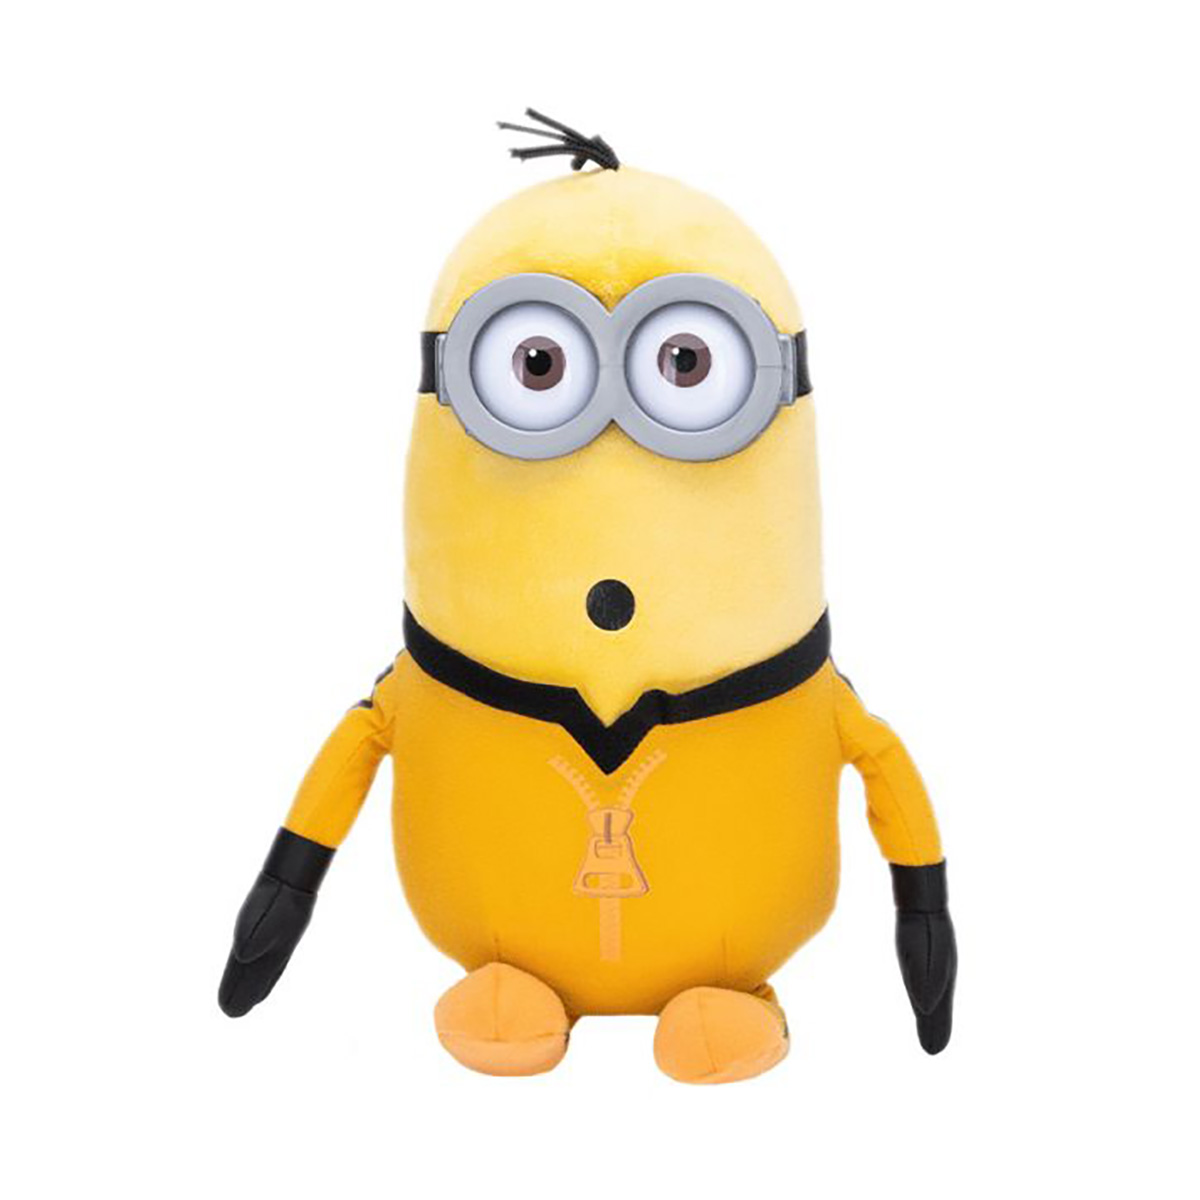 Poze Jucarie din plus Kevin Kung Fu, Minions, Play by Play, 30 cm